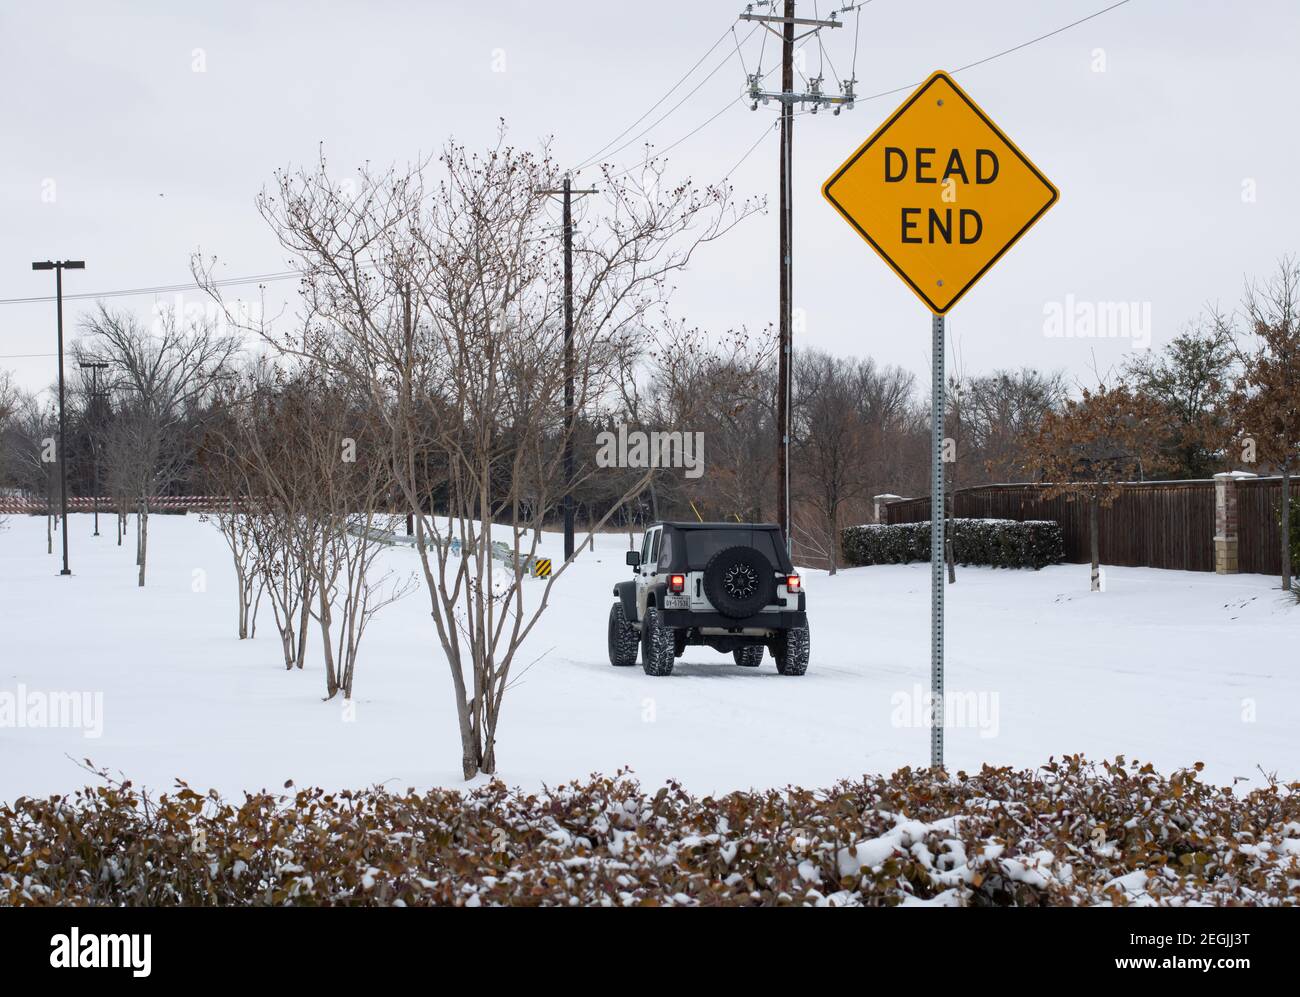 Mckinney, TX USA - February 17, 2021: Street view of Mckinney covered by heavy snow with a jeep rubicon driving on the road Stock Photo